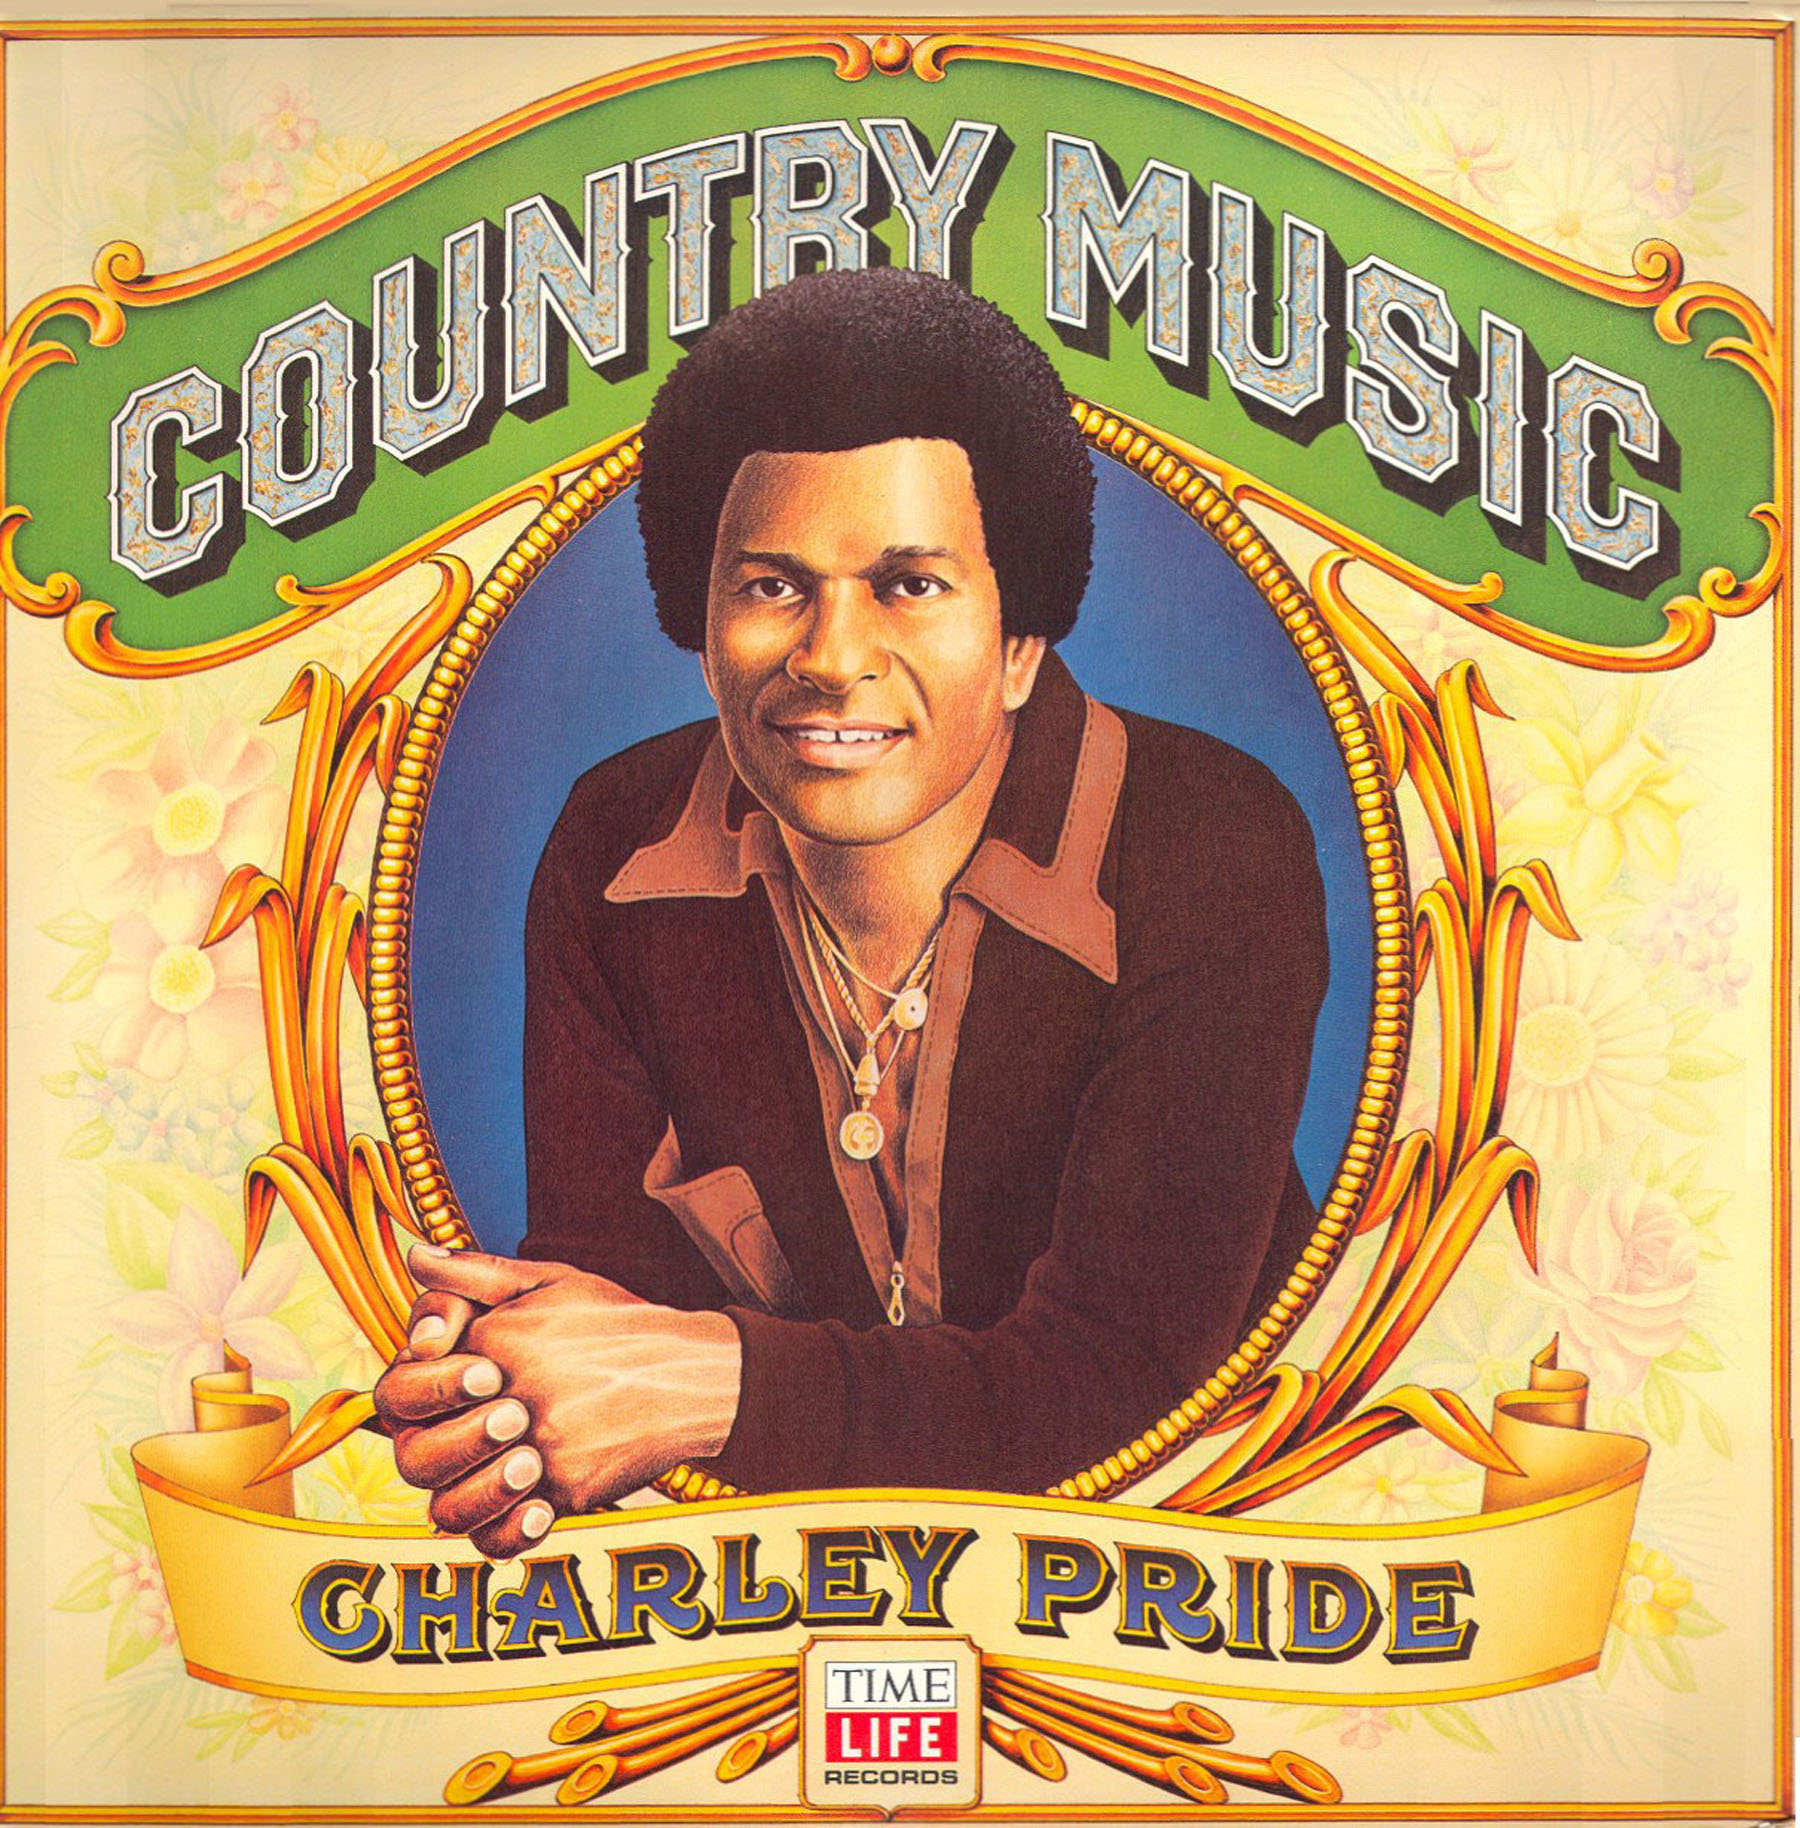 Time Life - Country Music - Charley Pride (Vinyl)